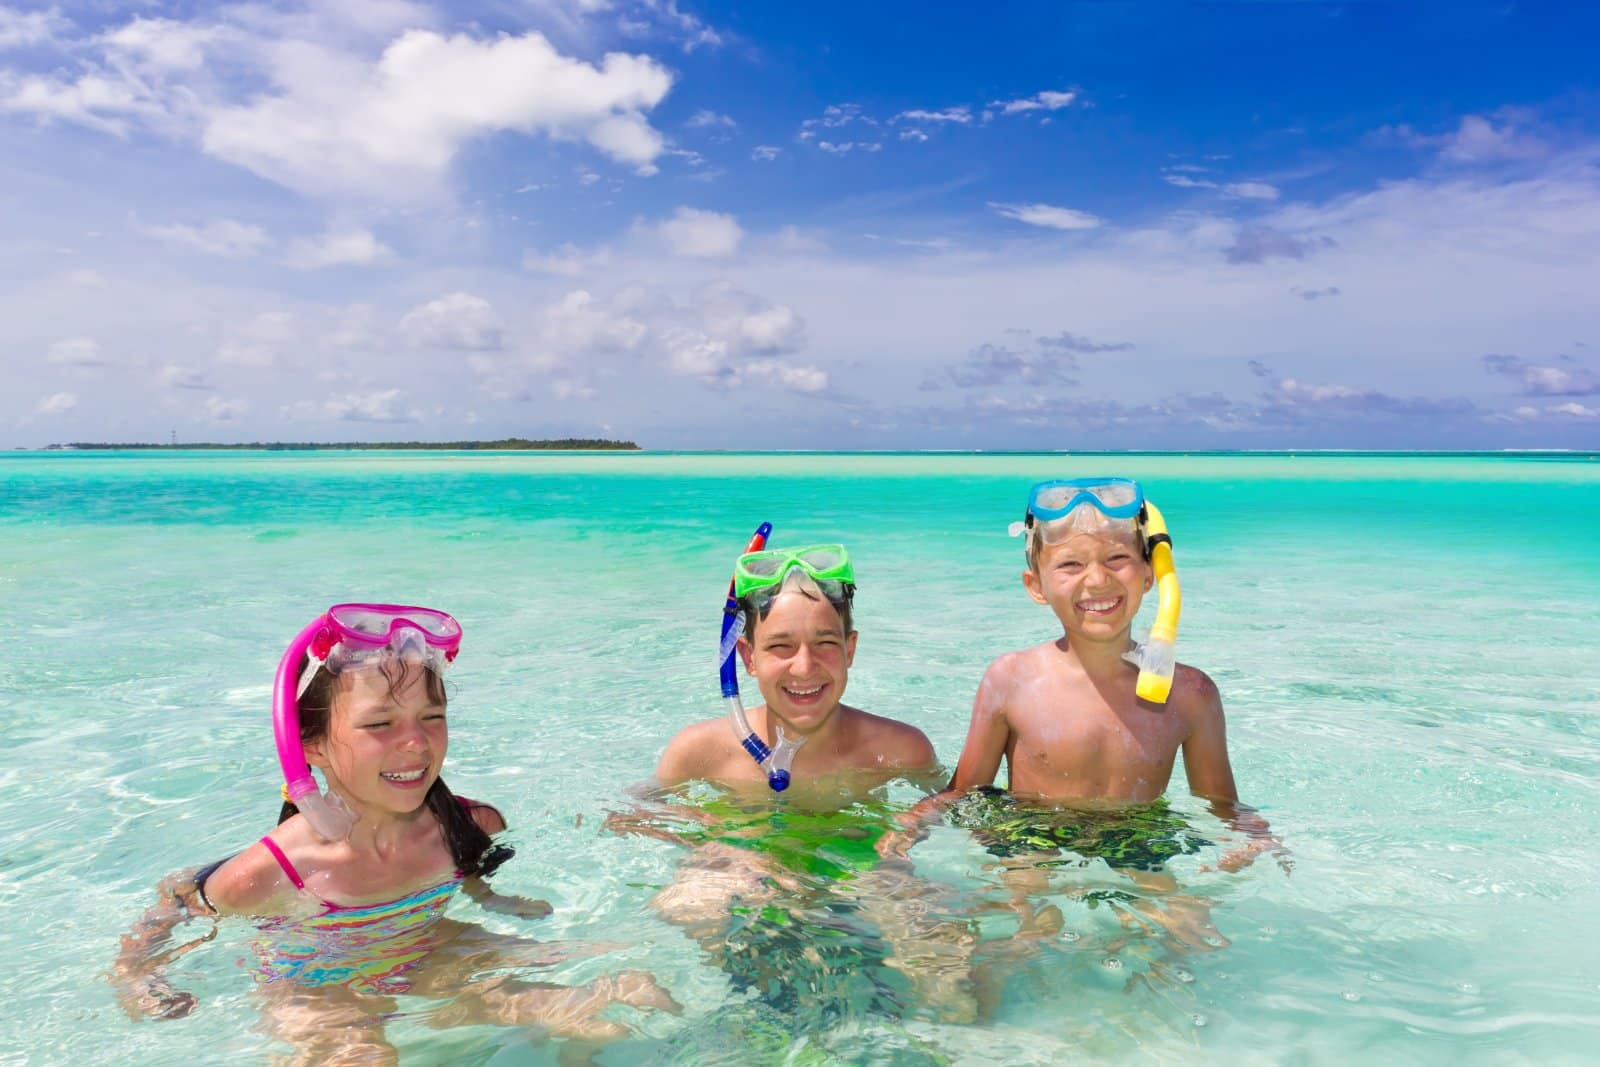 <p class="wp-caption-text">Image Credit: Shutterstock / MaszaS</p>  <p><span>The Maldives, a tropical paradise in the Indian Ocean, is renowned for its crystal-clear waters, vibrant coral reefs, and abundant marine life. The archipelago’s atolls offer some of the best snorkeling in the world, with easy access to the reefs right from the islands’ shores. Snorkelers can expect to encounter a wide array of marine life, including colorful fish, sea turtles, rays, and even whale sharks in certain areas.</span></p> <p><b>Insider’s Tip: </b><span>For a unique experience, choose a resort that offers night snorkeling tours to see the reef’s nocturnal creatures come to life.</span></p> <p><b>When to Travel: </b><span>The dry season from November to April offers the best snorkeling conditions, with calm seas and excellent visibility.</span></p> <p><b>How to Get There: </b><span>International flights arrive at Malé International Airport. From there, seaplanes or boats are typically used to reach the various islands and resorts.</span></p>